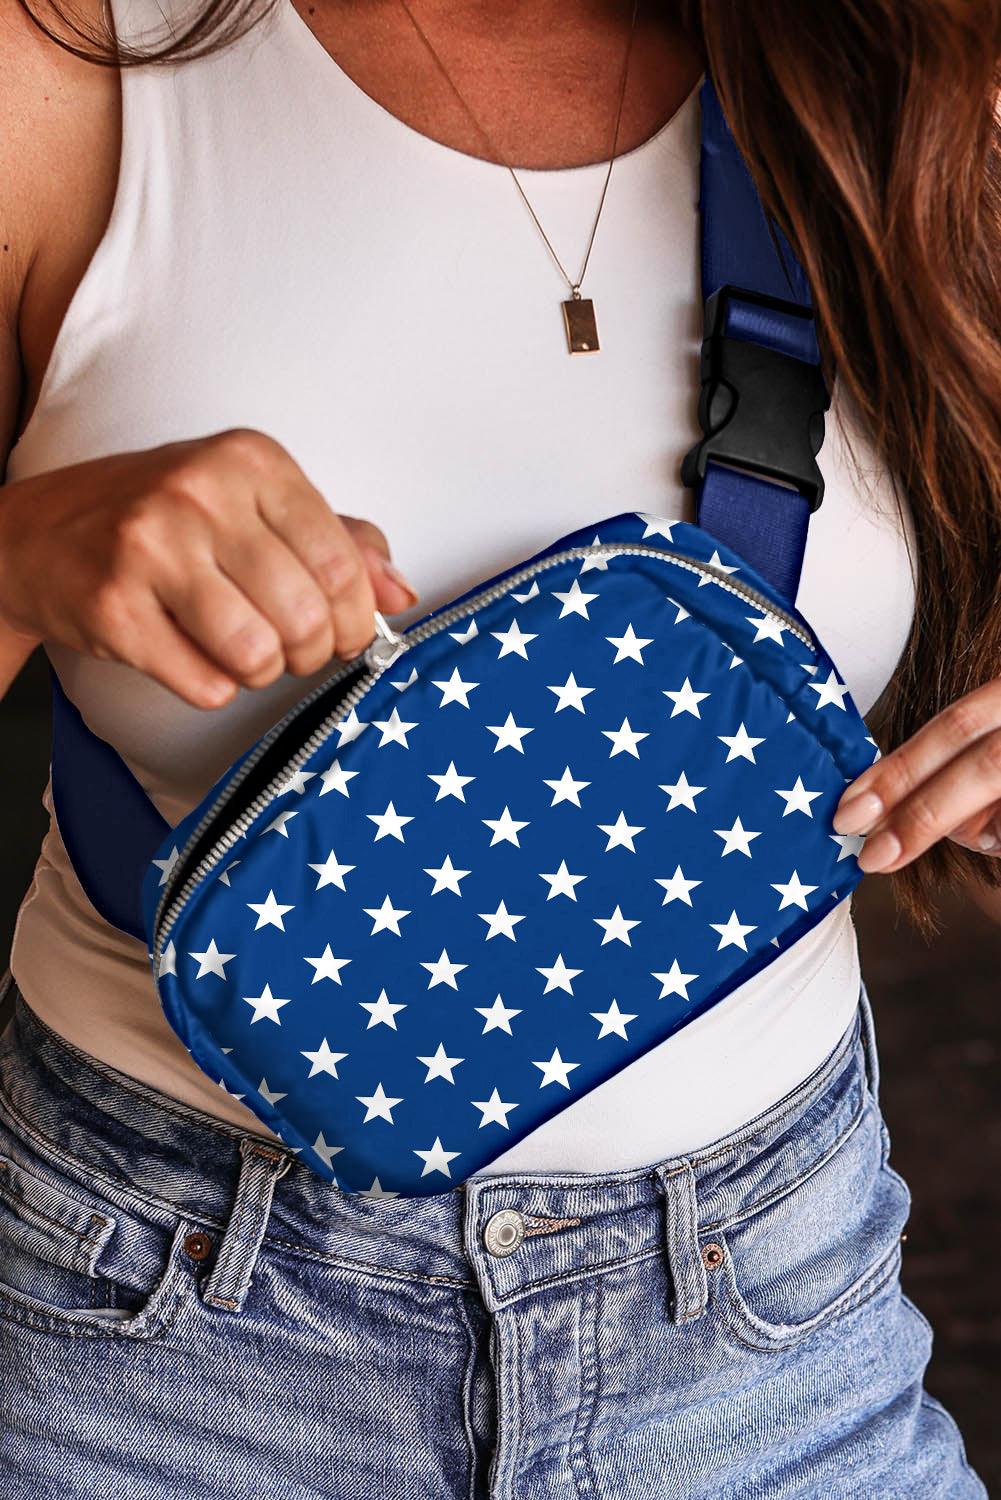 Bluing Independent Day Flag Star Printed Crossbody Bag